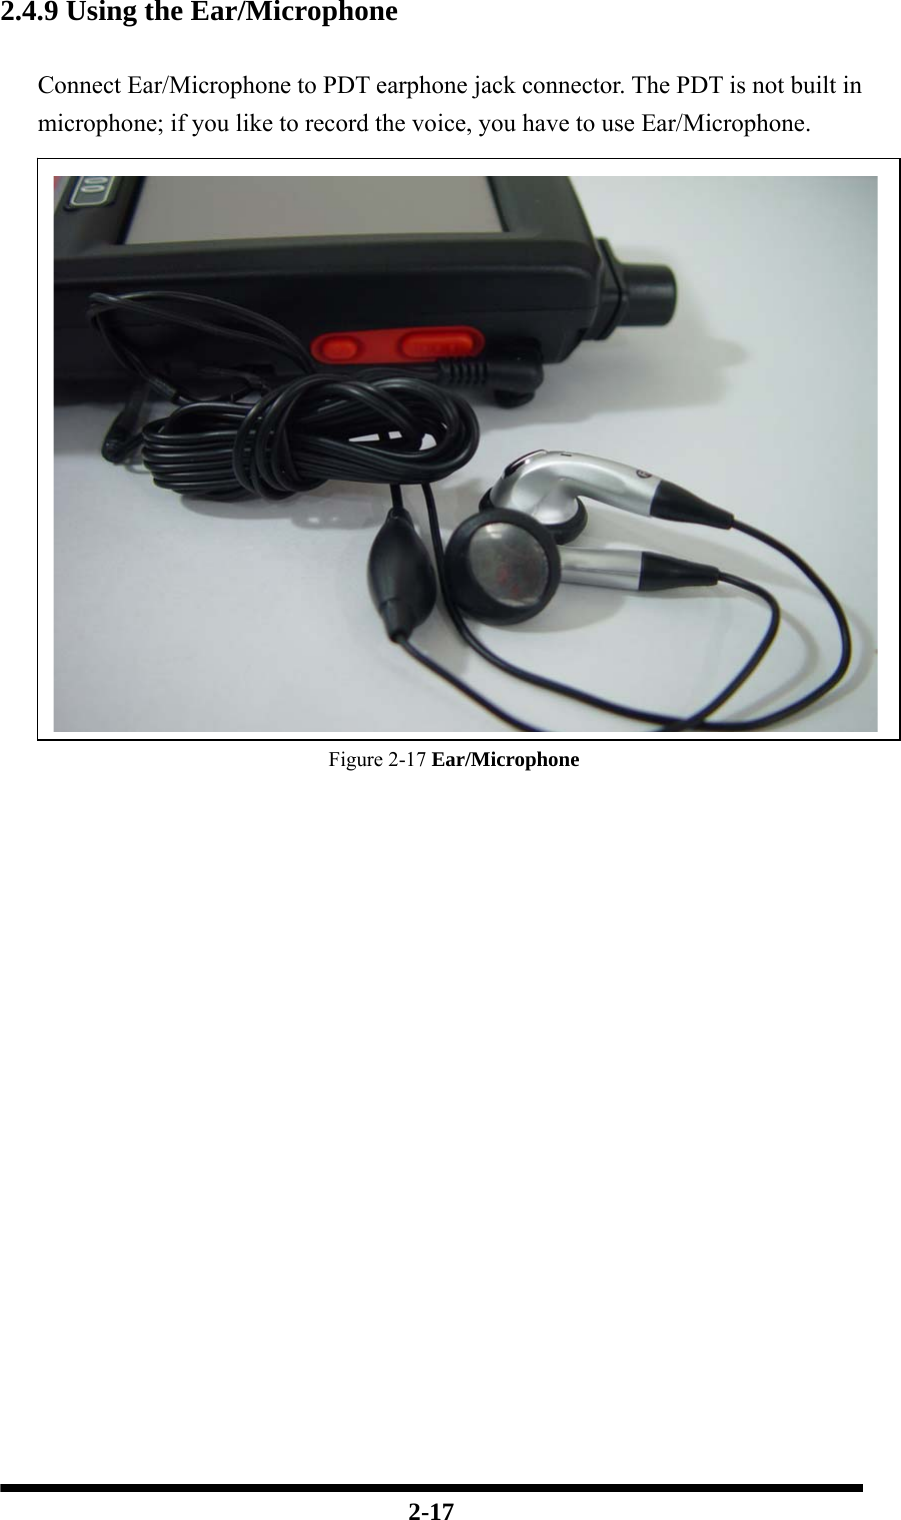  2-17 2.4.9 Using the Ear/Microphone  Connect Ear/Microphone to PDT earphone jack connector. The PDT is not built in microphone; if you like to record the voice, you have to use Ear/Microphone. Figure 2-17 Ear/Microphone                  